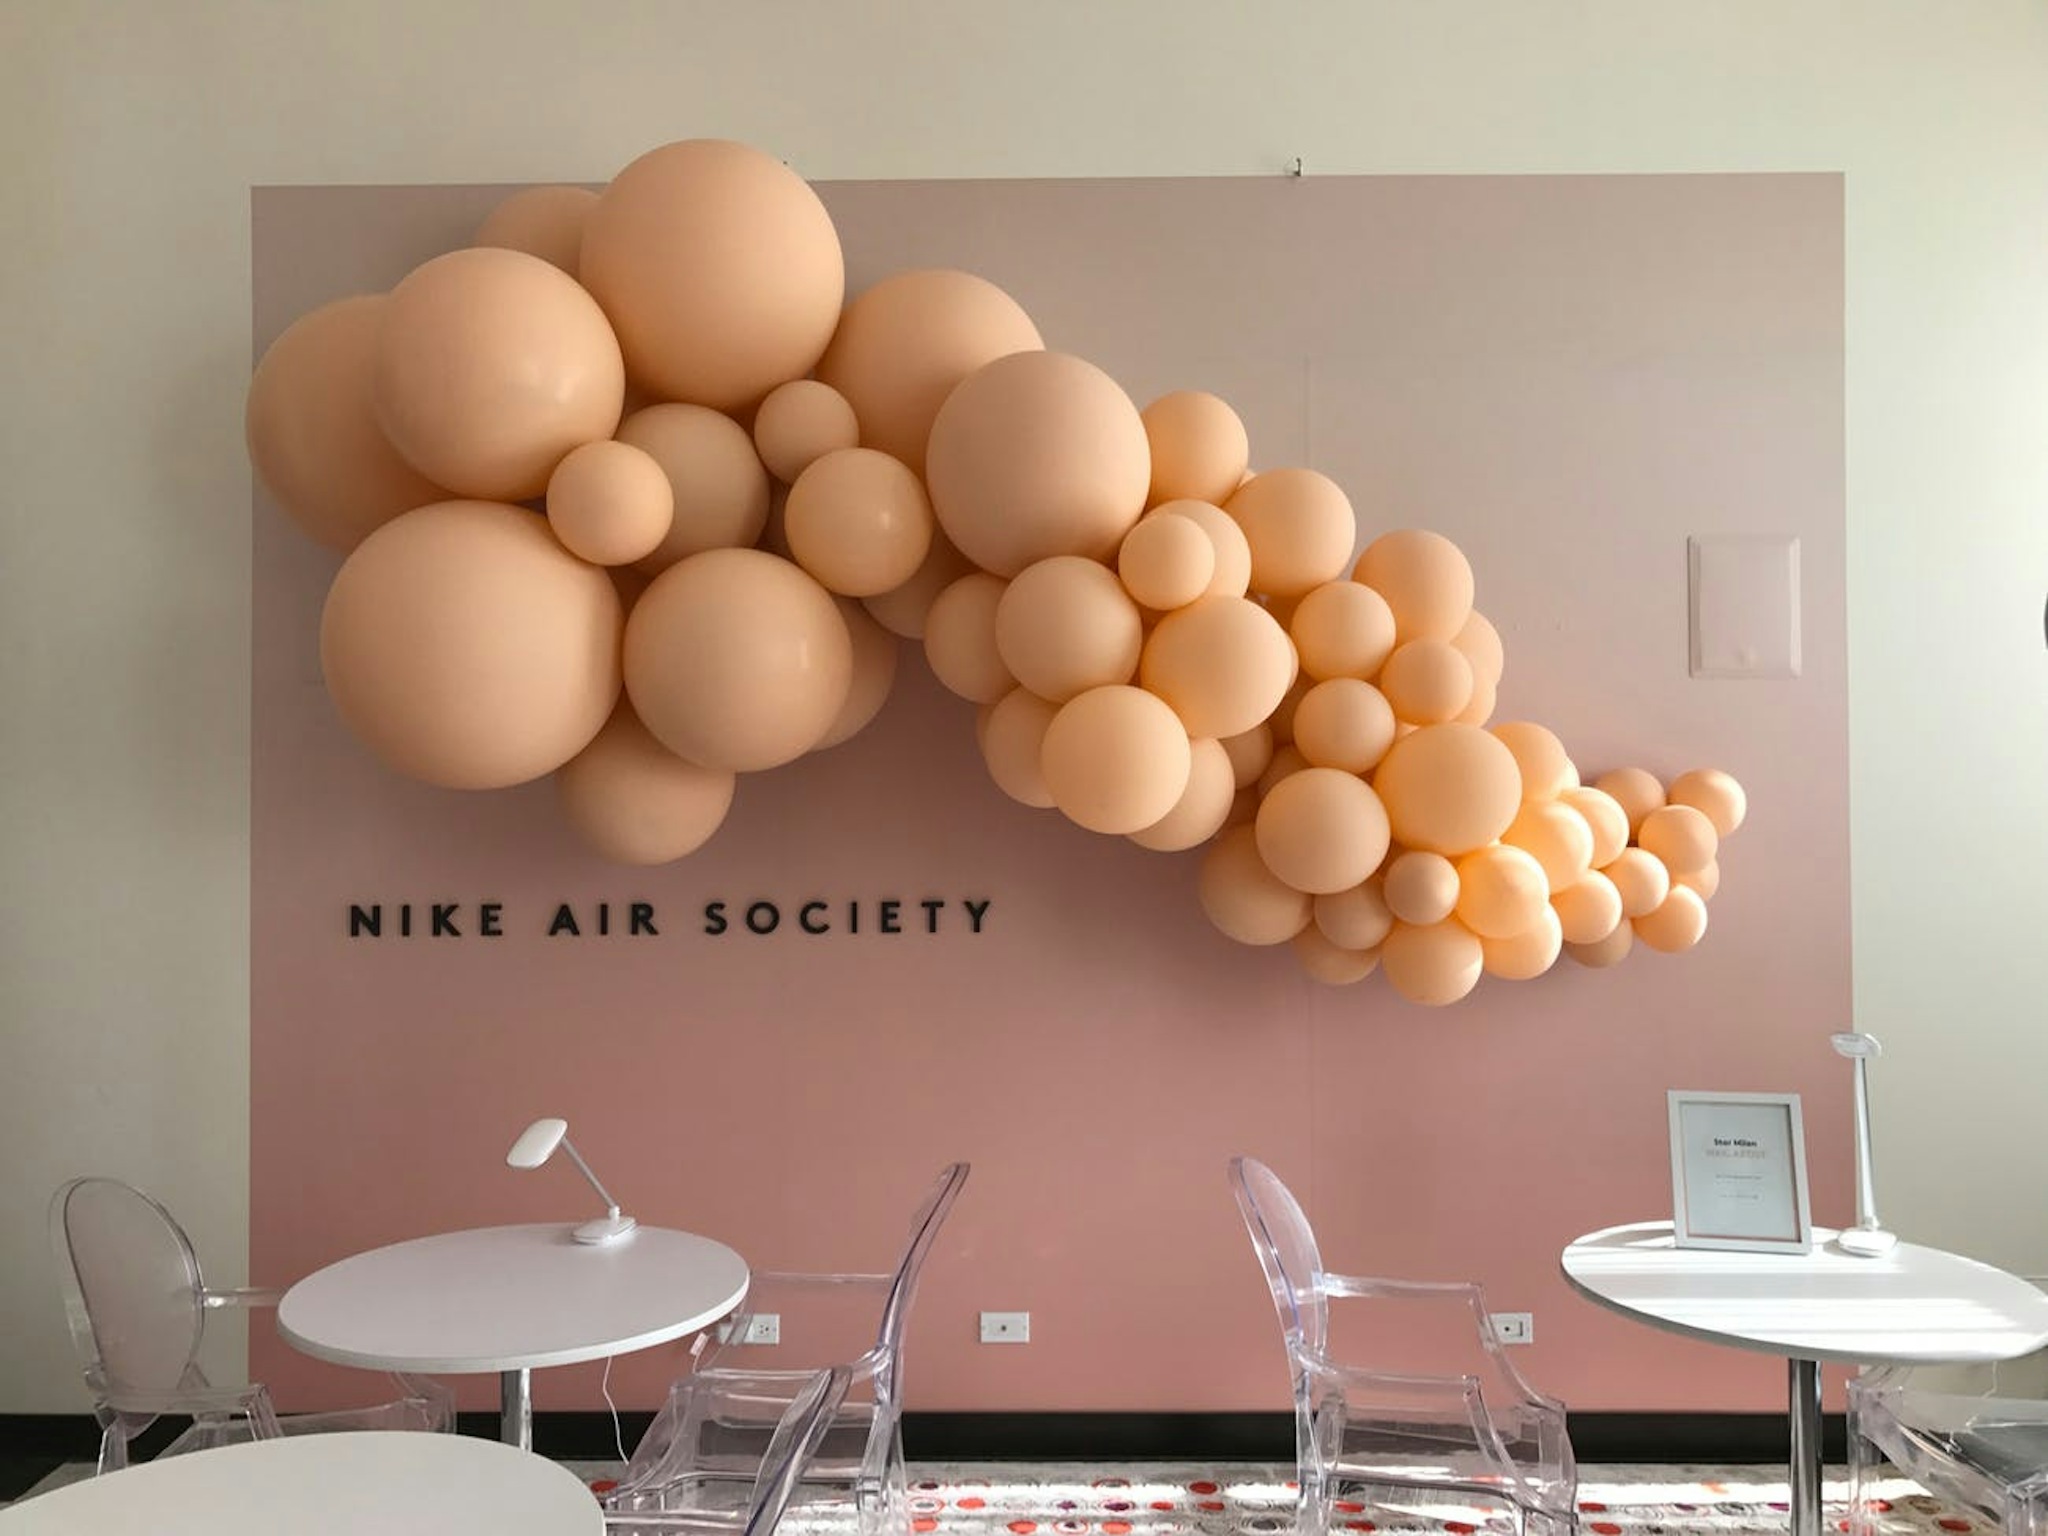 Nike Air Society balloon wall at Chicago influencer event for the Nike Air's new women's shoes